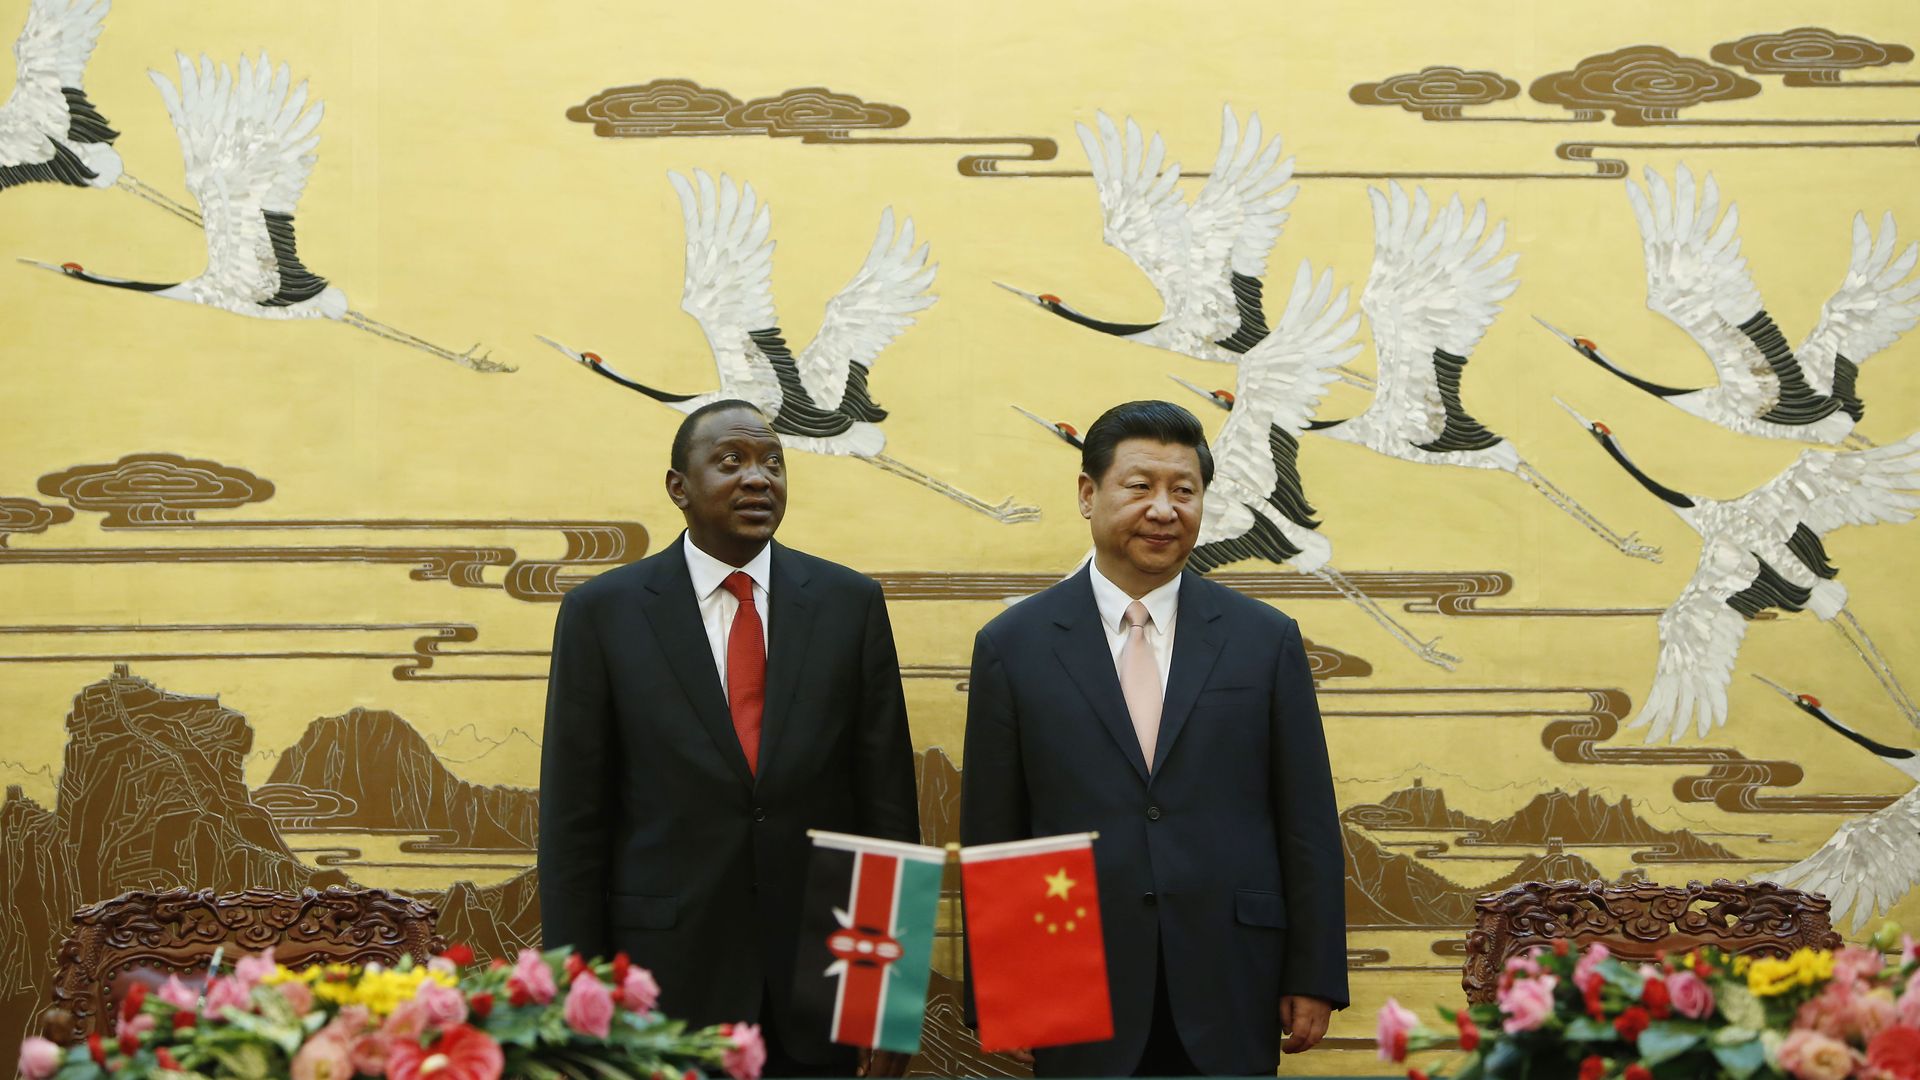 Xi and Uhuru stand in front of a mural of birds in Beijing's Great Hall of the People